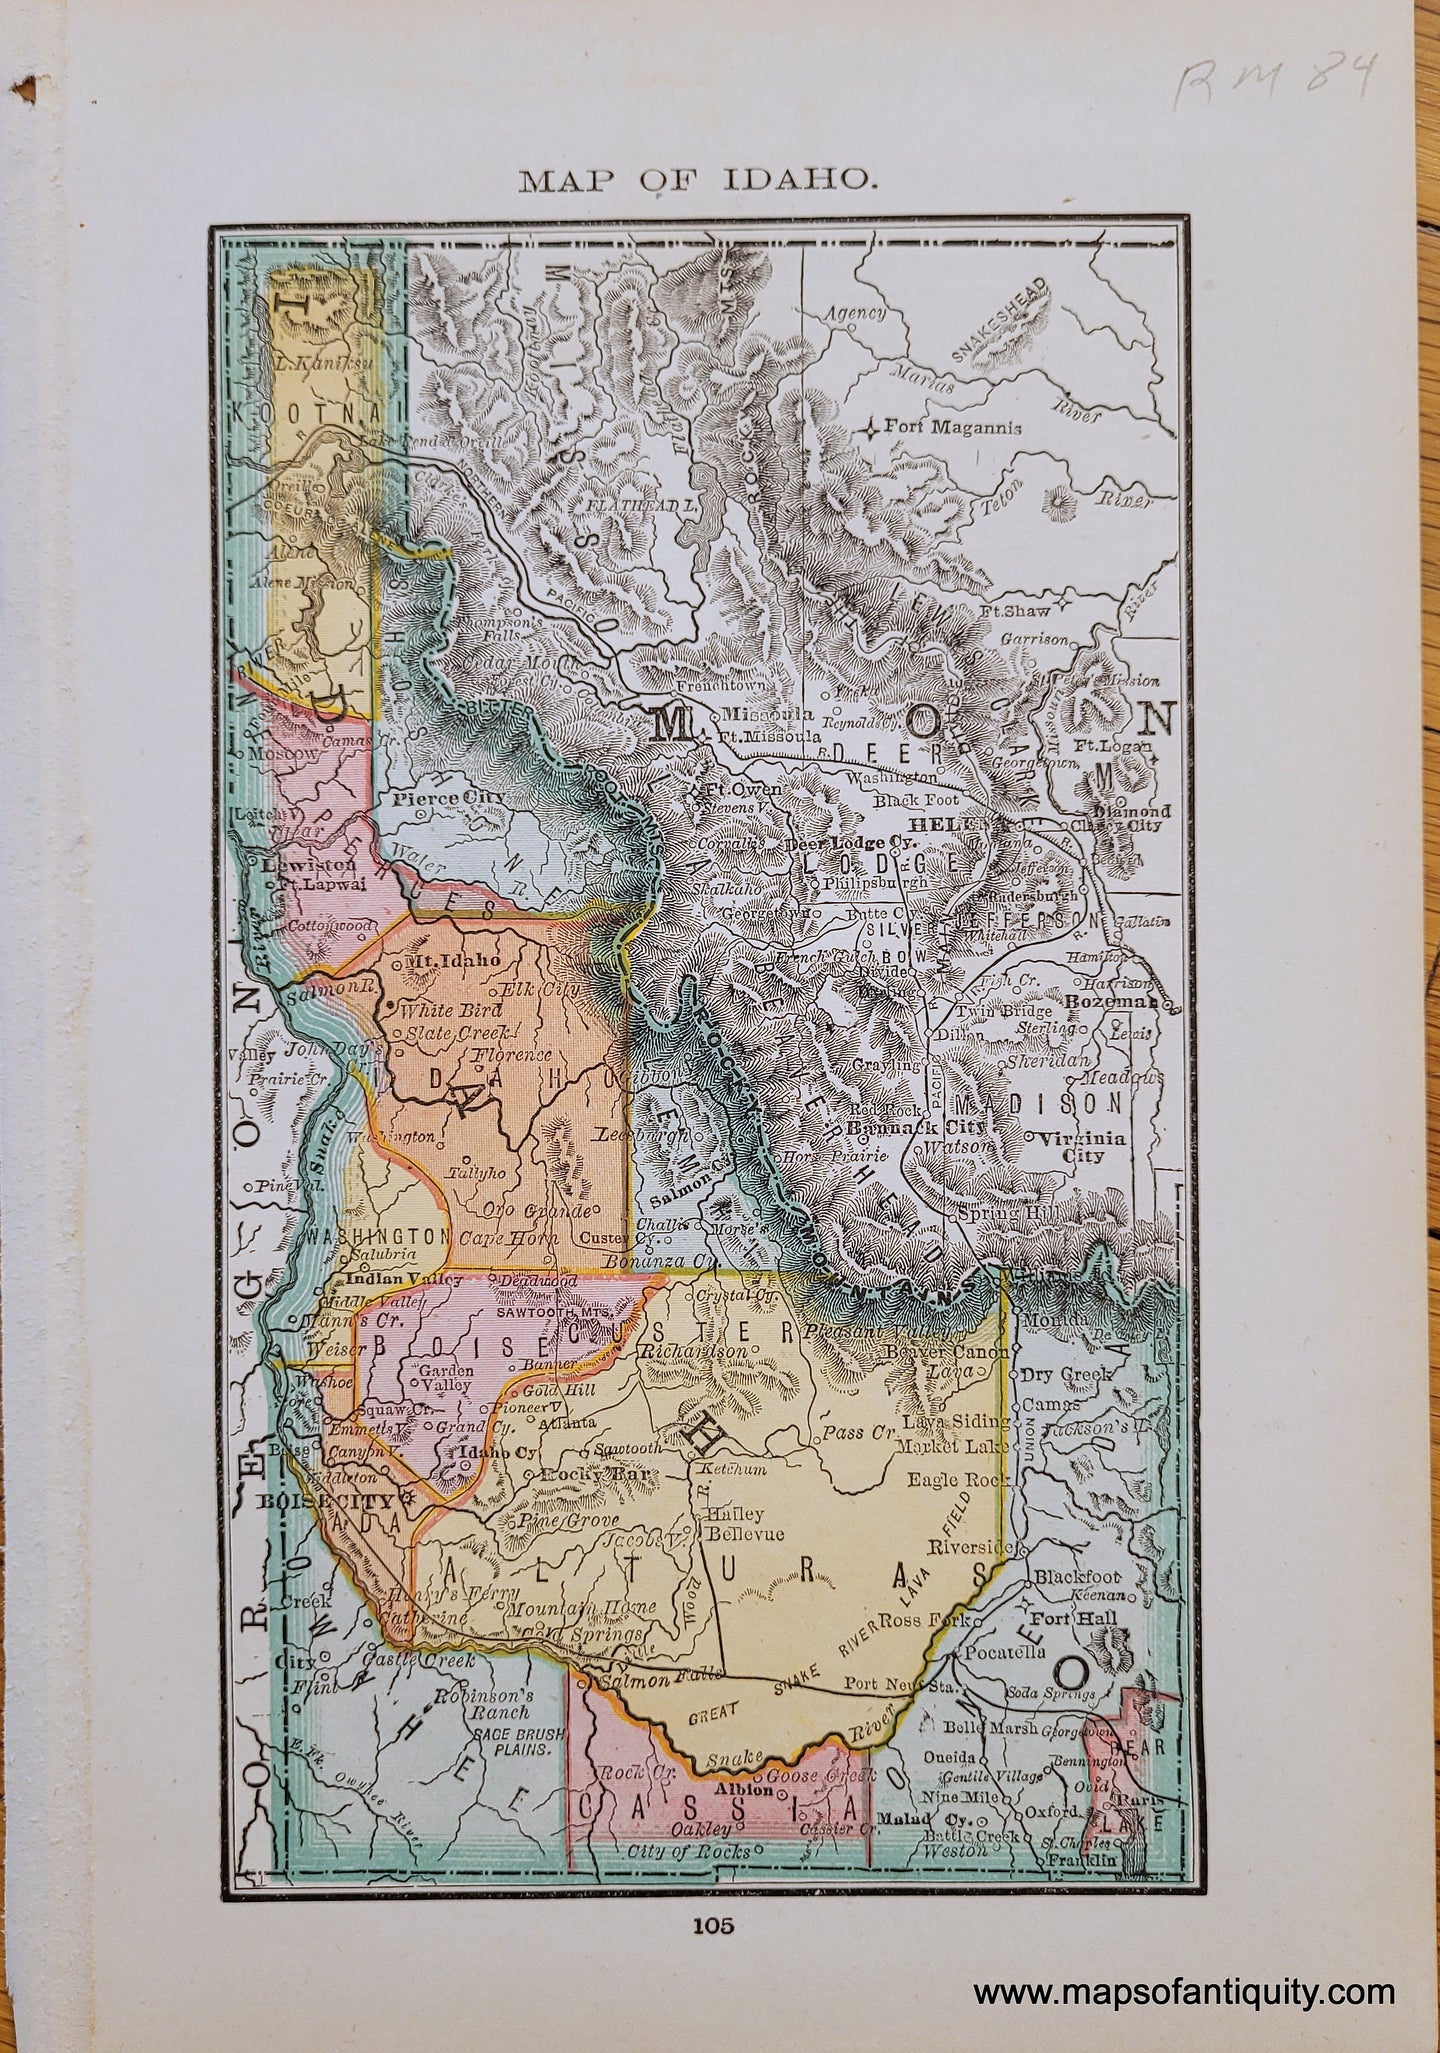 Genuine Antique Map-Map of Idaho-1884-Rand McNally & Co-Maps-Of-Antiquity